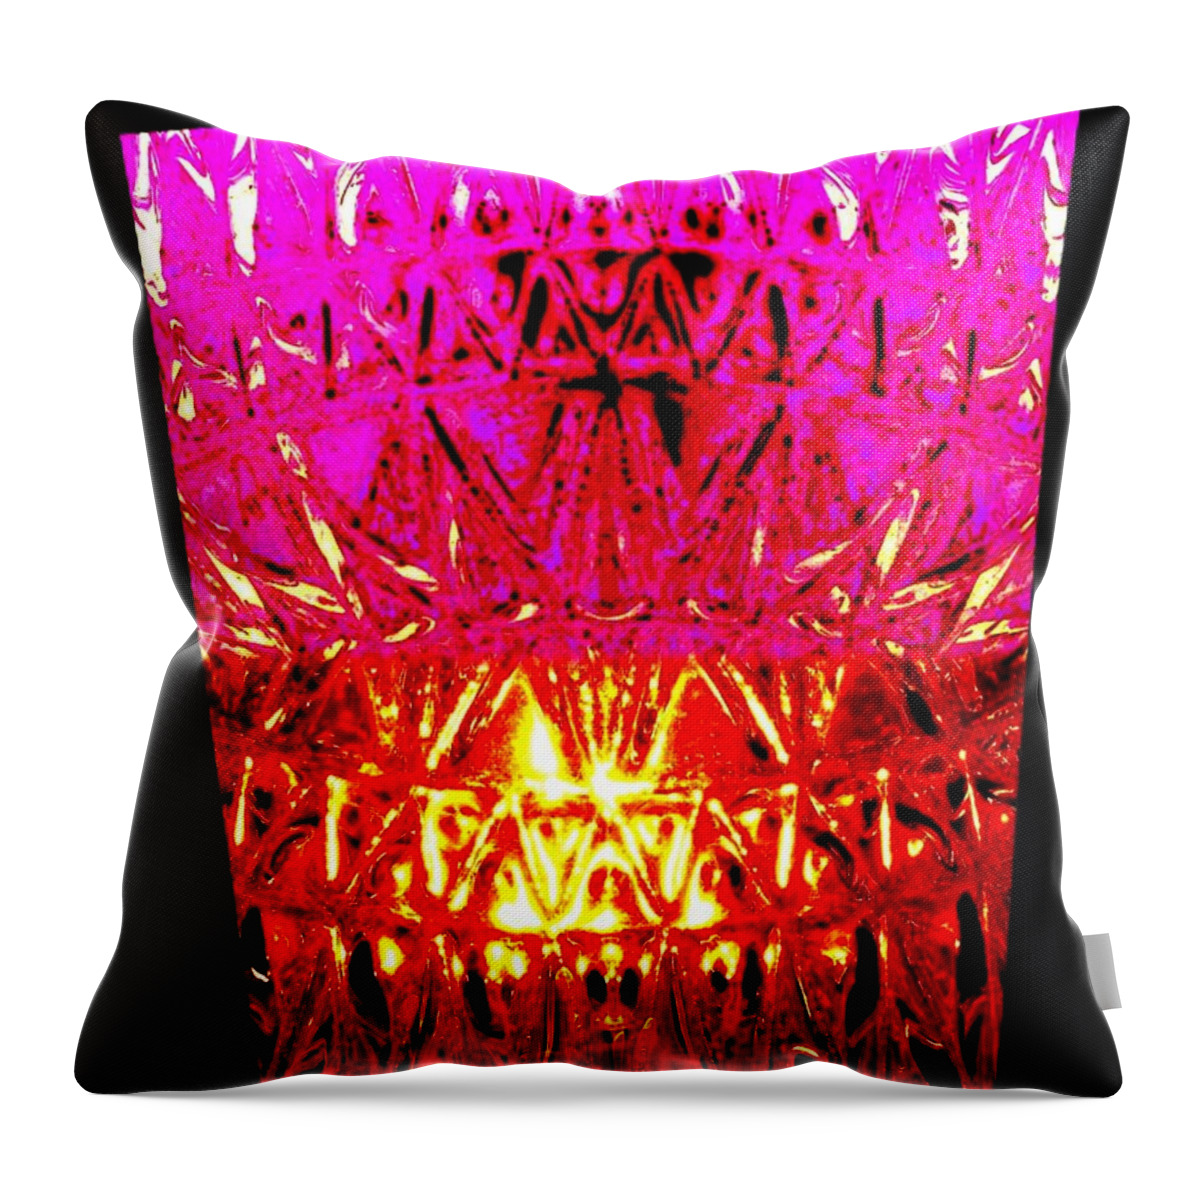 #abstractfusion267 Throw Pillow featuring the digital art Abstract Fusion 267 by Will Borden